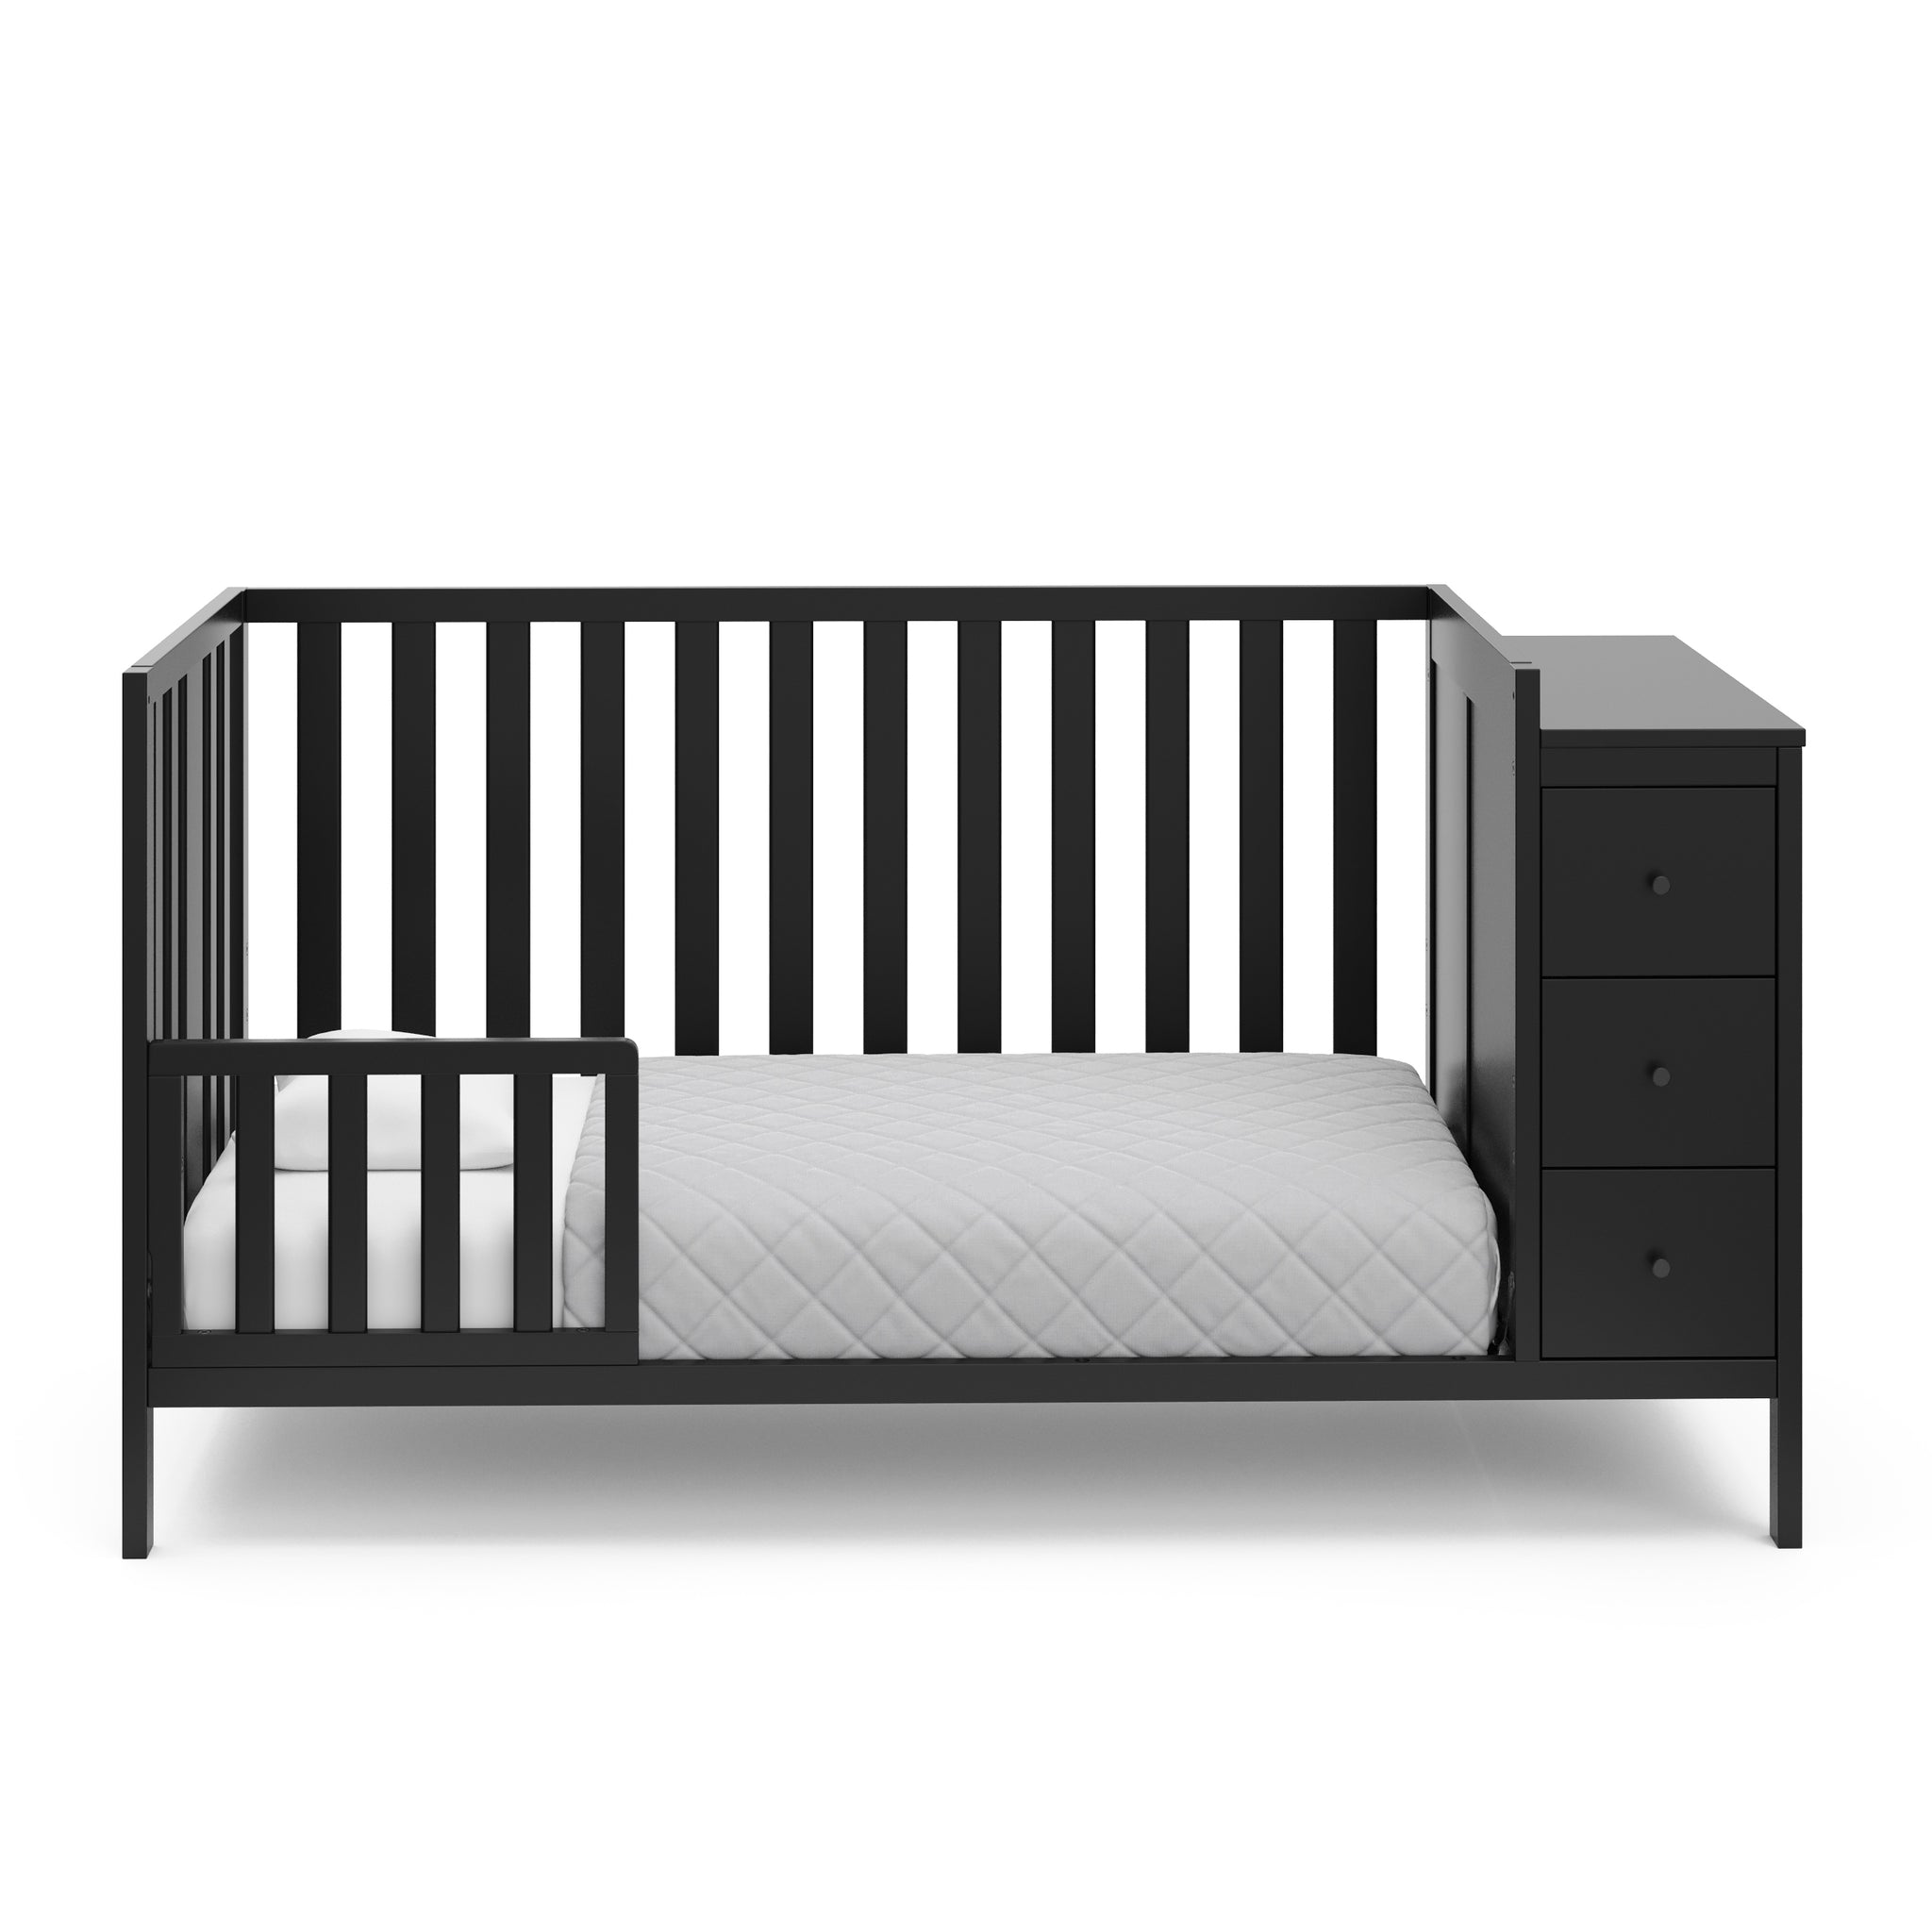 black crib with storage in toddler bed conversion with one safety guardrail